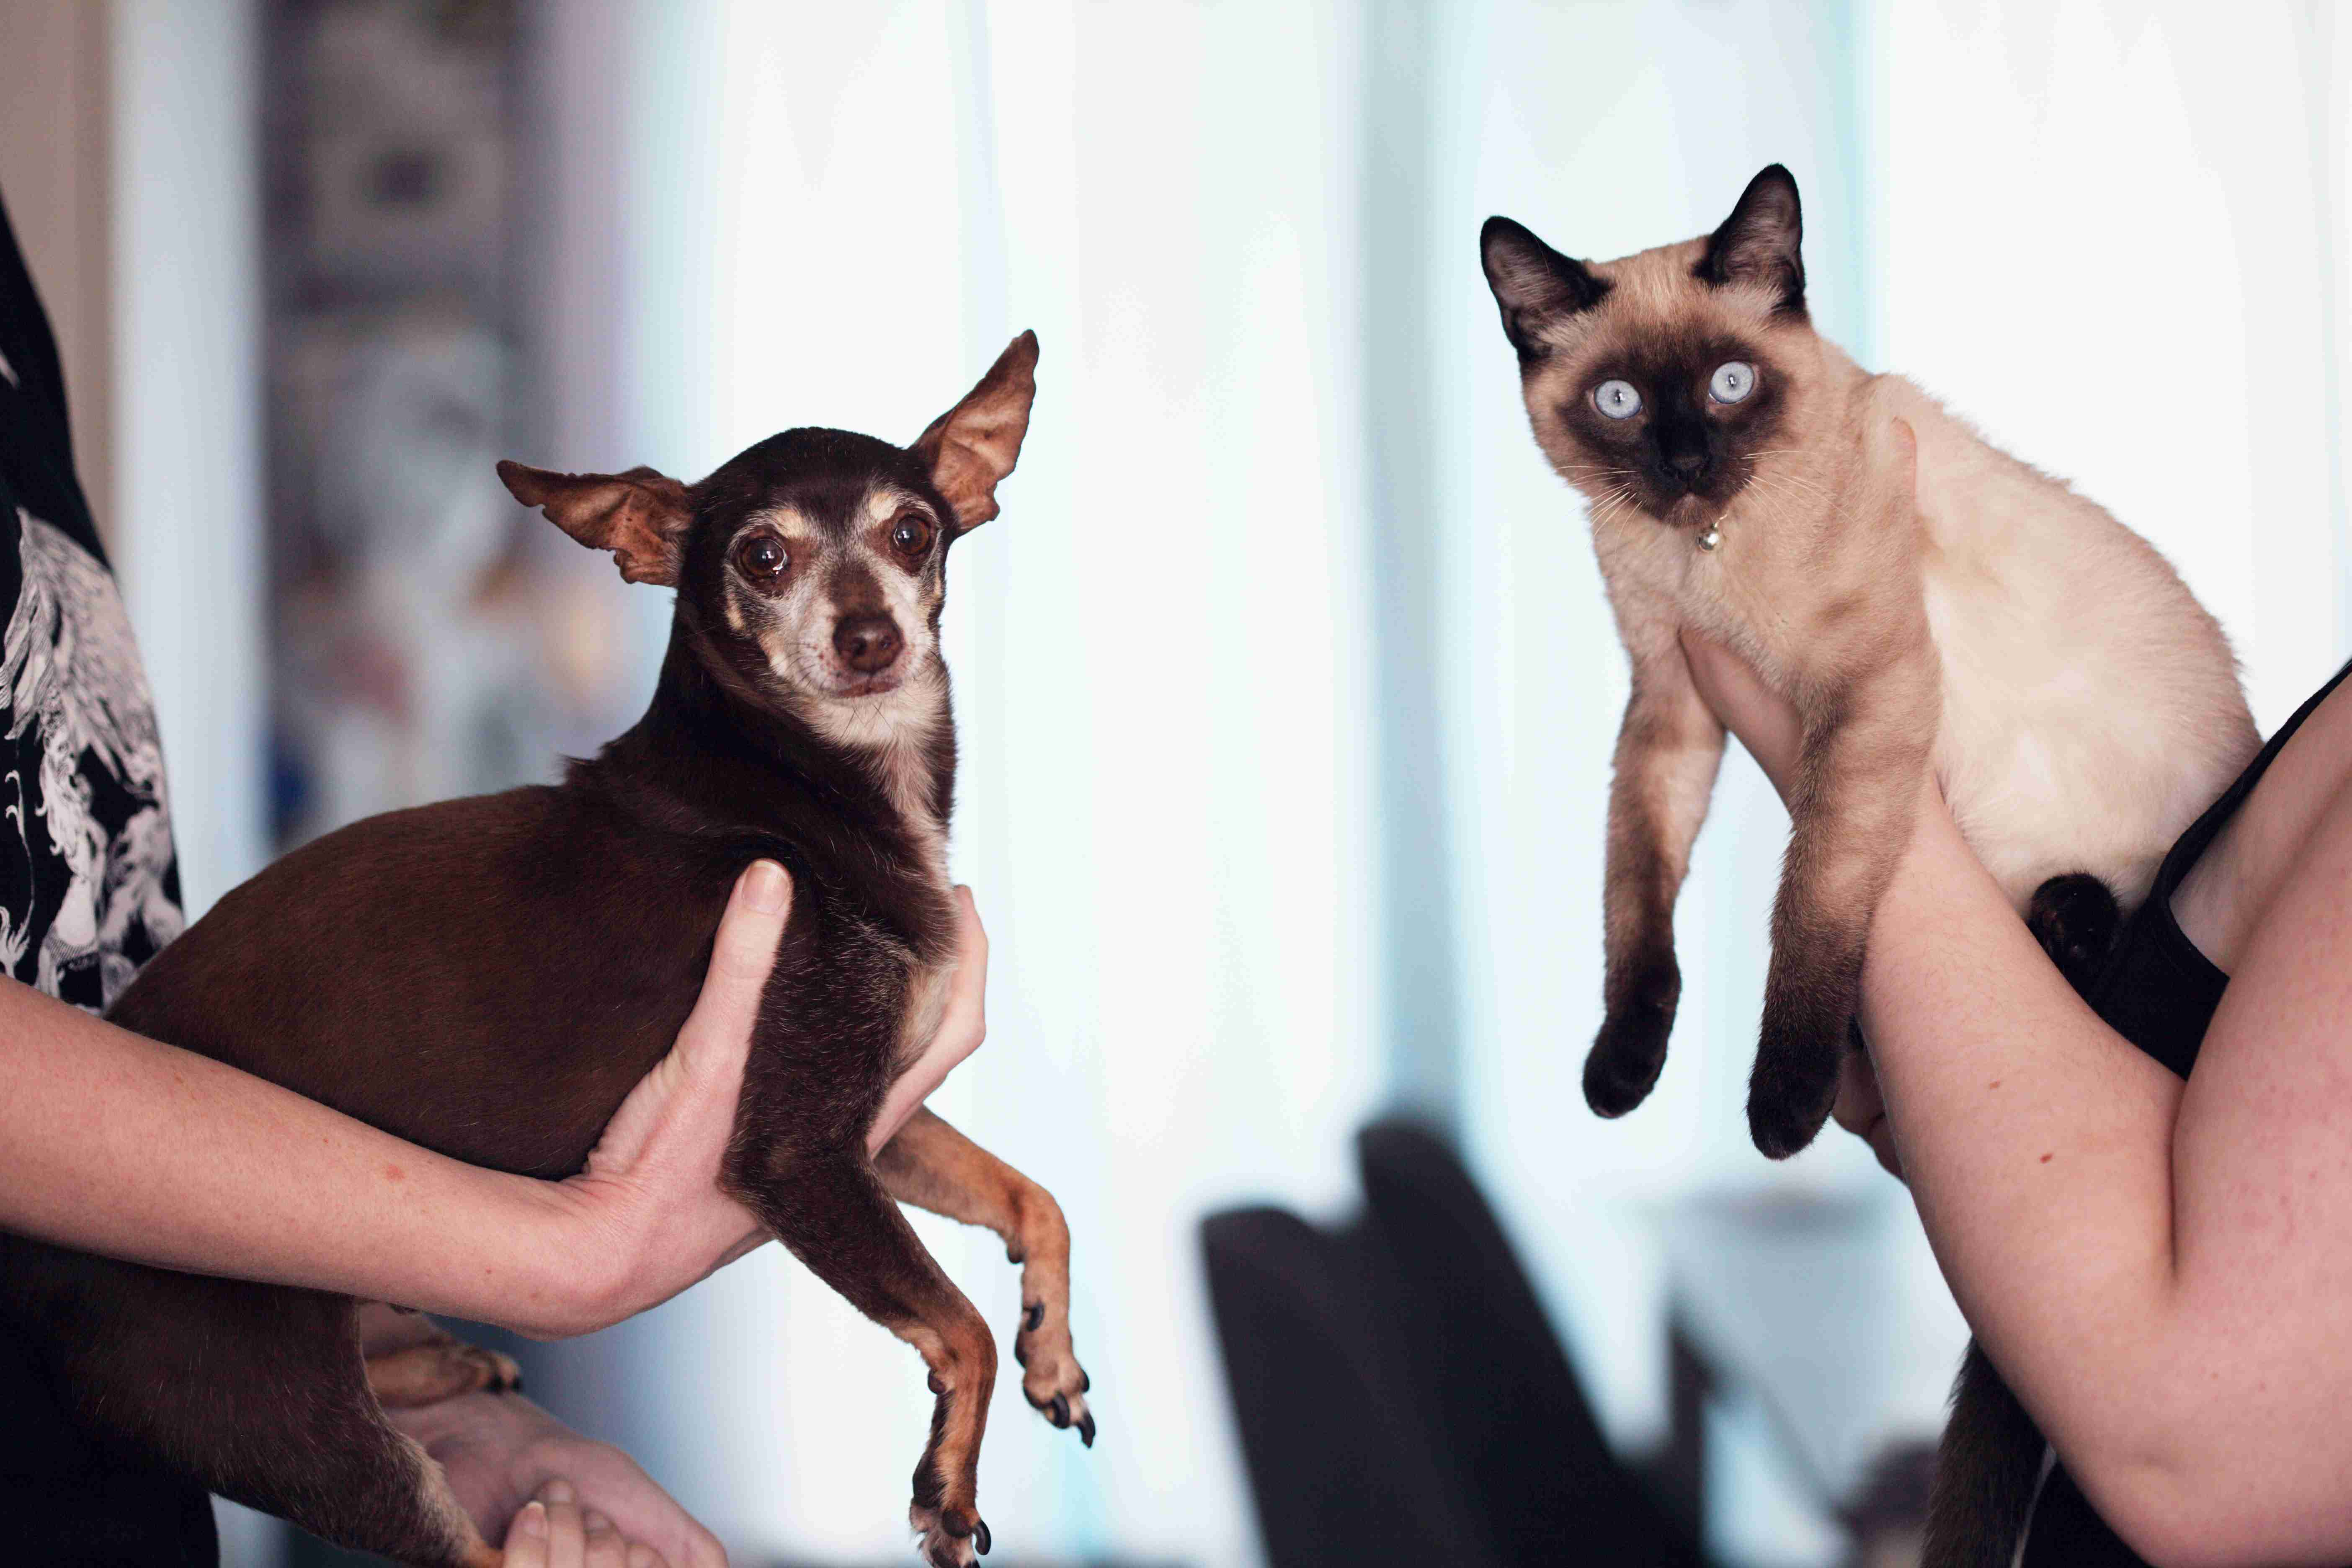 What are some warning signs that a Chihuahua may be about to display aggressive behavior?